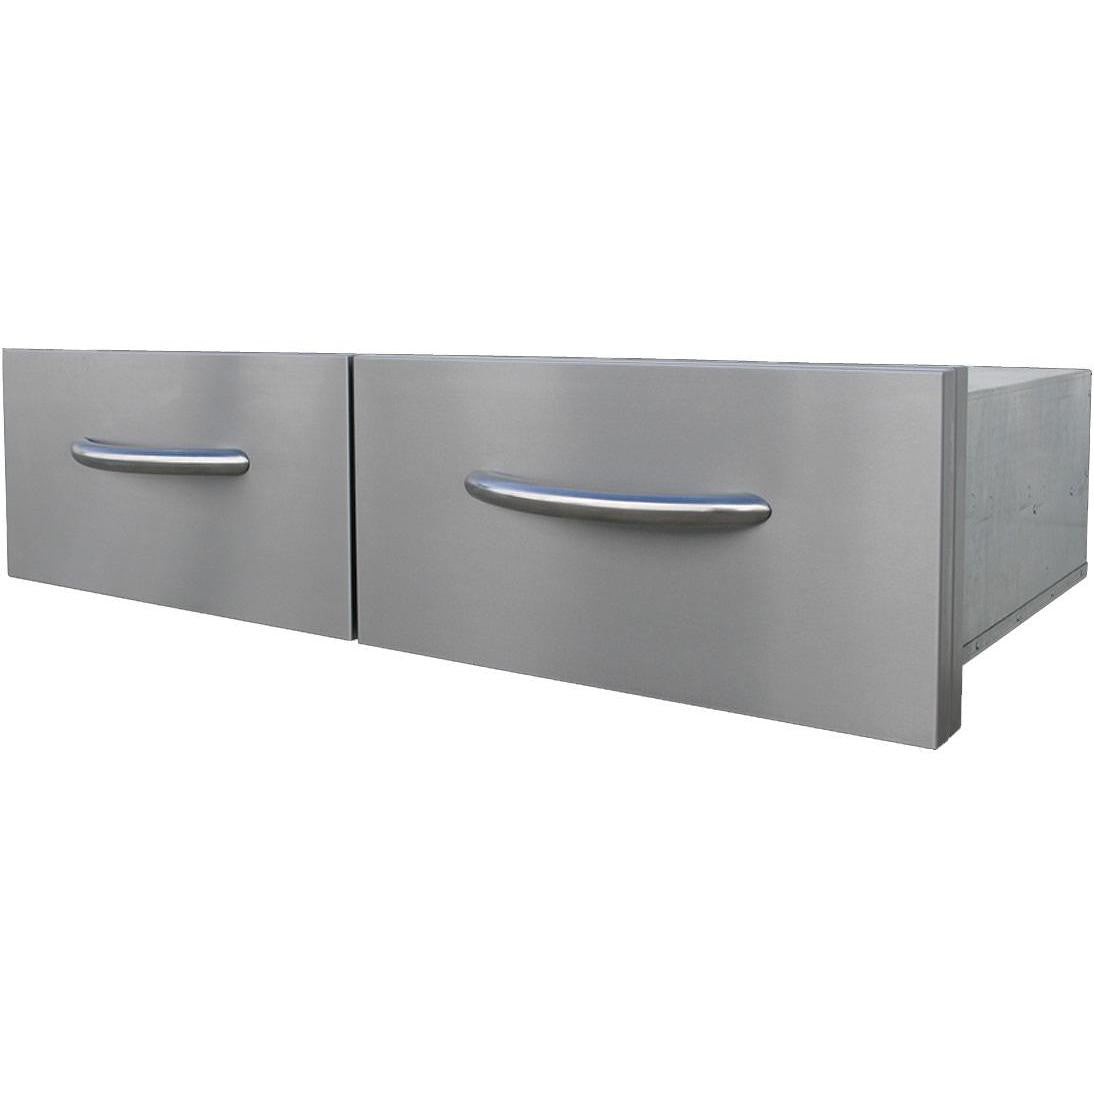 Cal FlameCal Flame Side by Side Double Access Drawers 39 inch BBQ08867 BBQ08867- BetterPatio.com